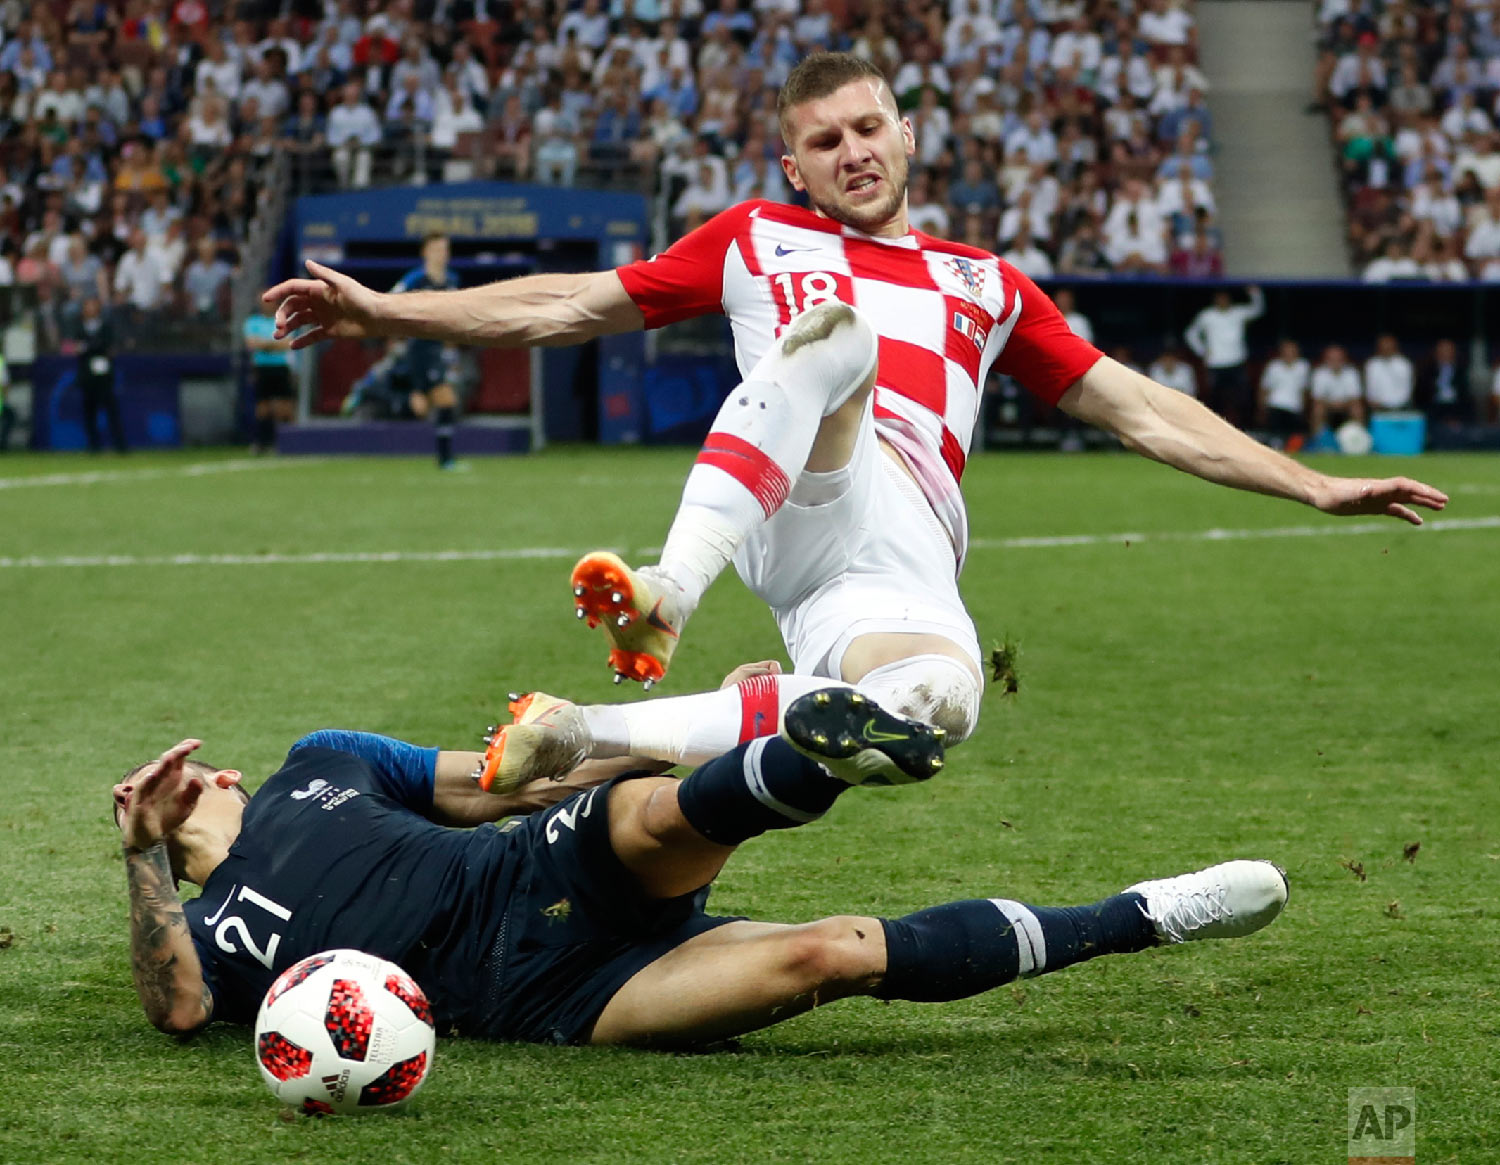  Croatia's Ante Rebic, top, tackles France's Lucas Hernandez during the final match between France and Croatia at the 2018 soccer World Cup in the Luzhniki Stadium in Moscow, Russia, on July 15, 2018. (AP Photo/Francisco Seco) 